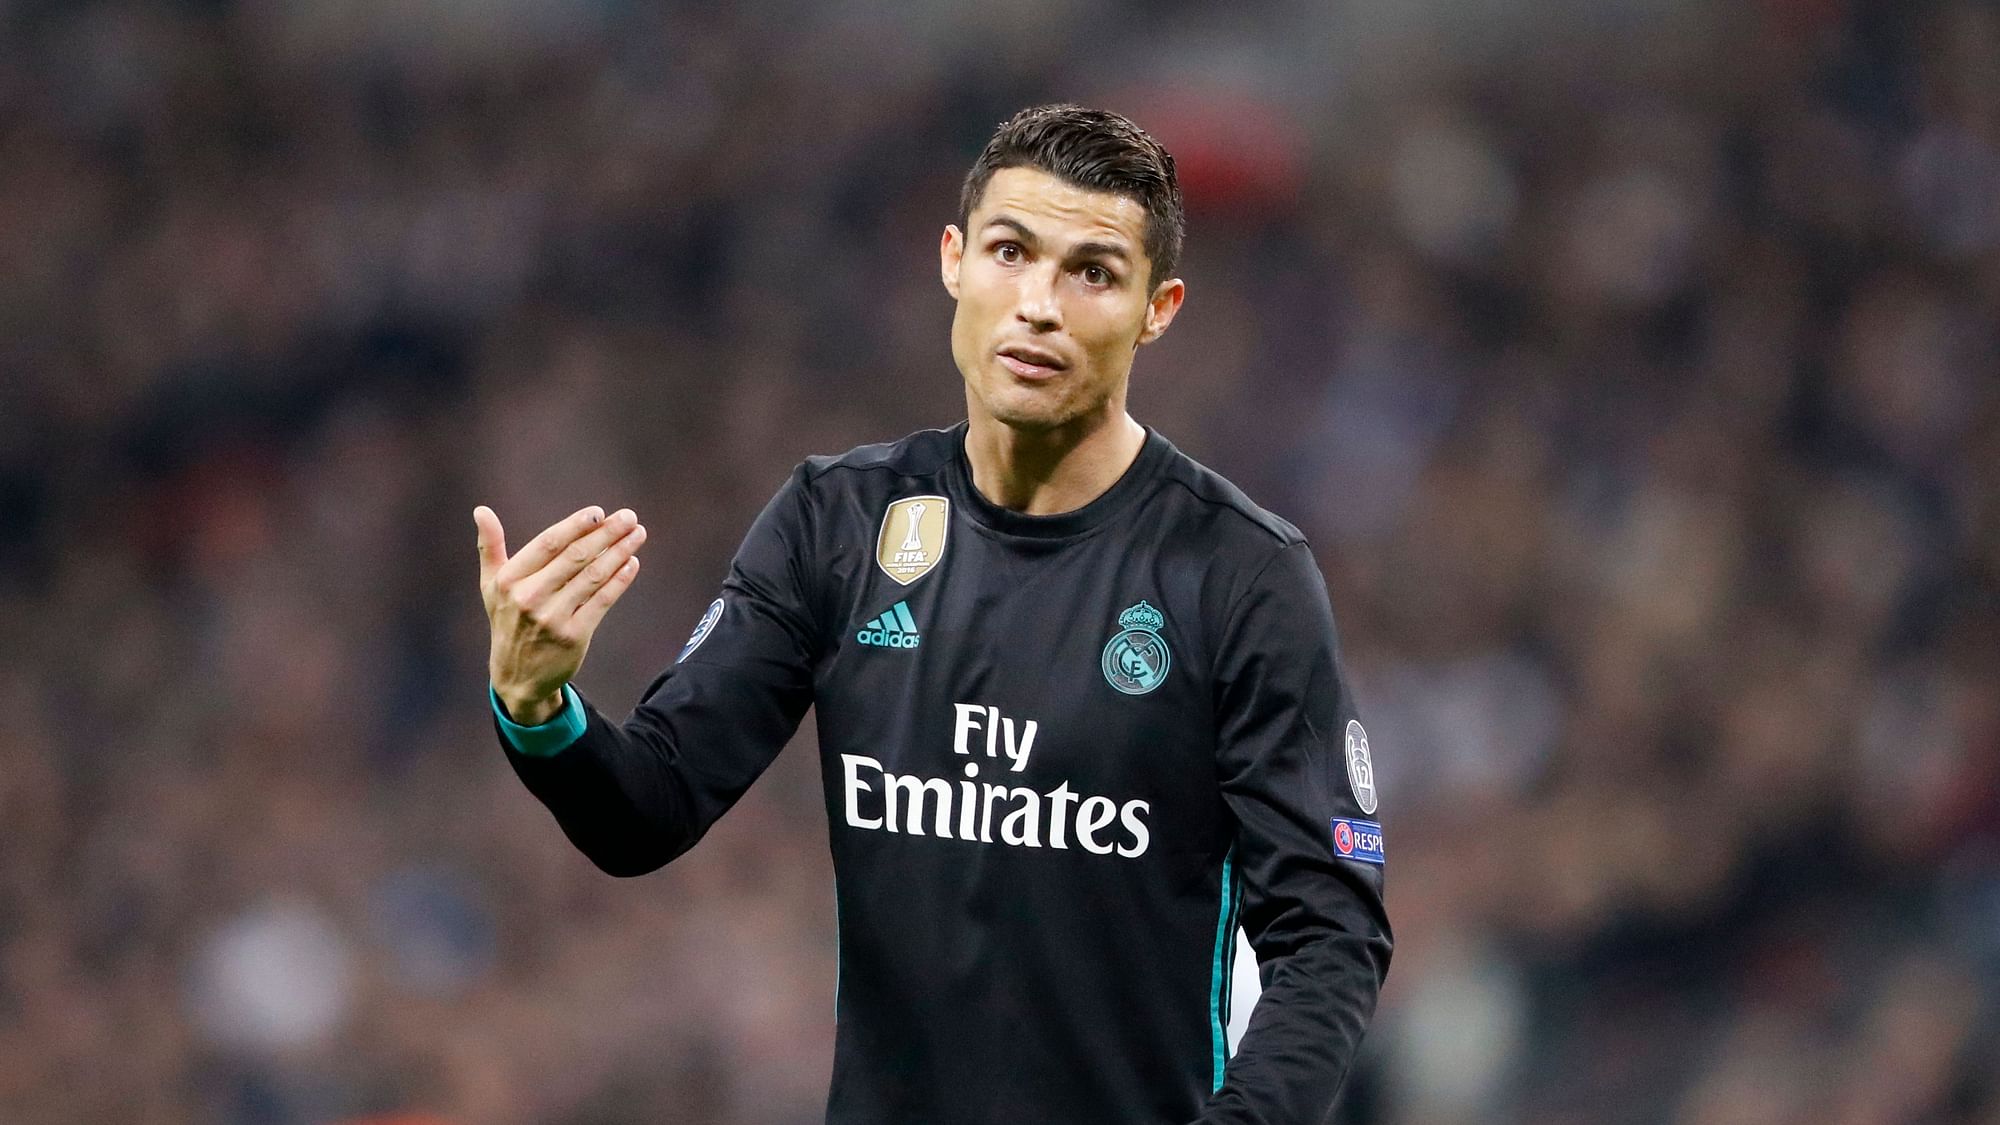 A lawsuit by a Nevada woman accusing soccer star Cristiano Ronaldo of raping her in 2009 at a Las Vegas Strip resort has been moved from state to federal court in Las Vegas.